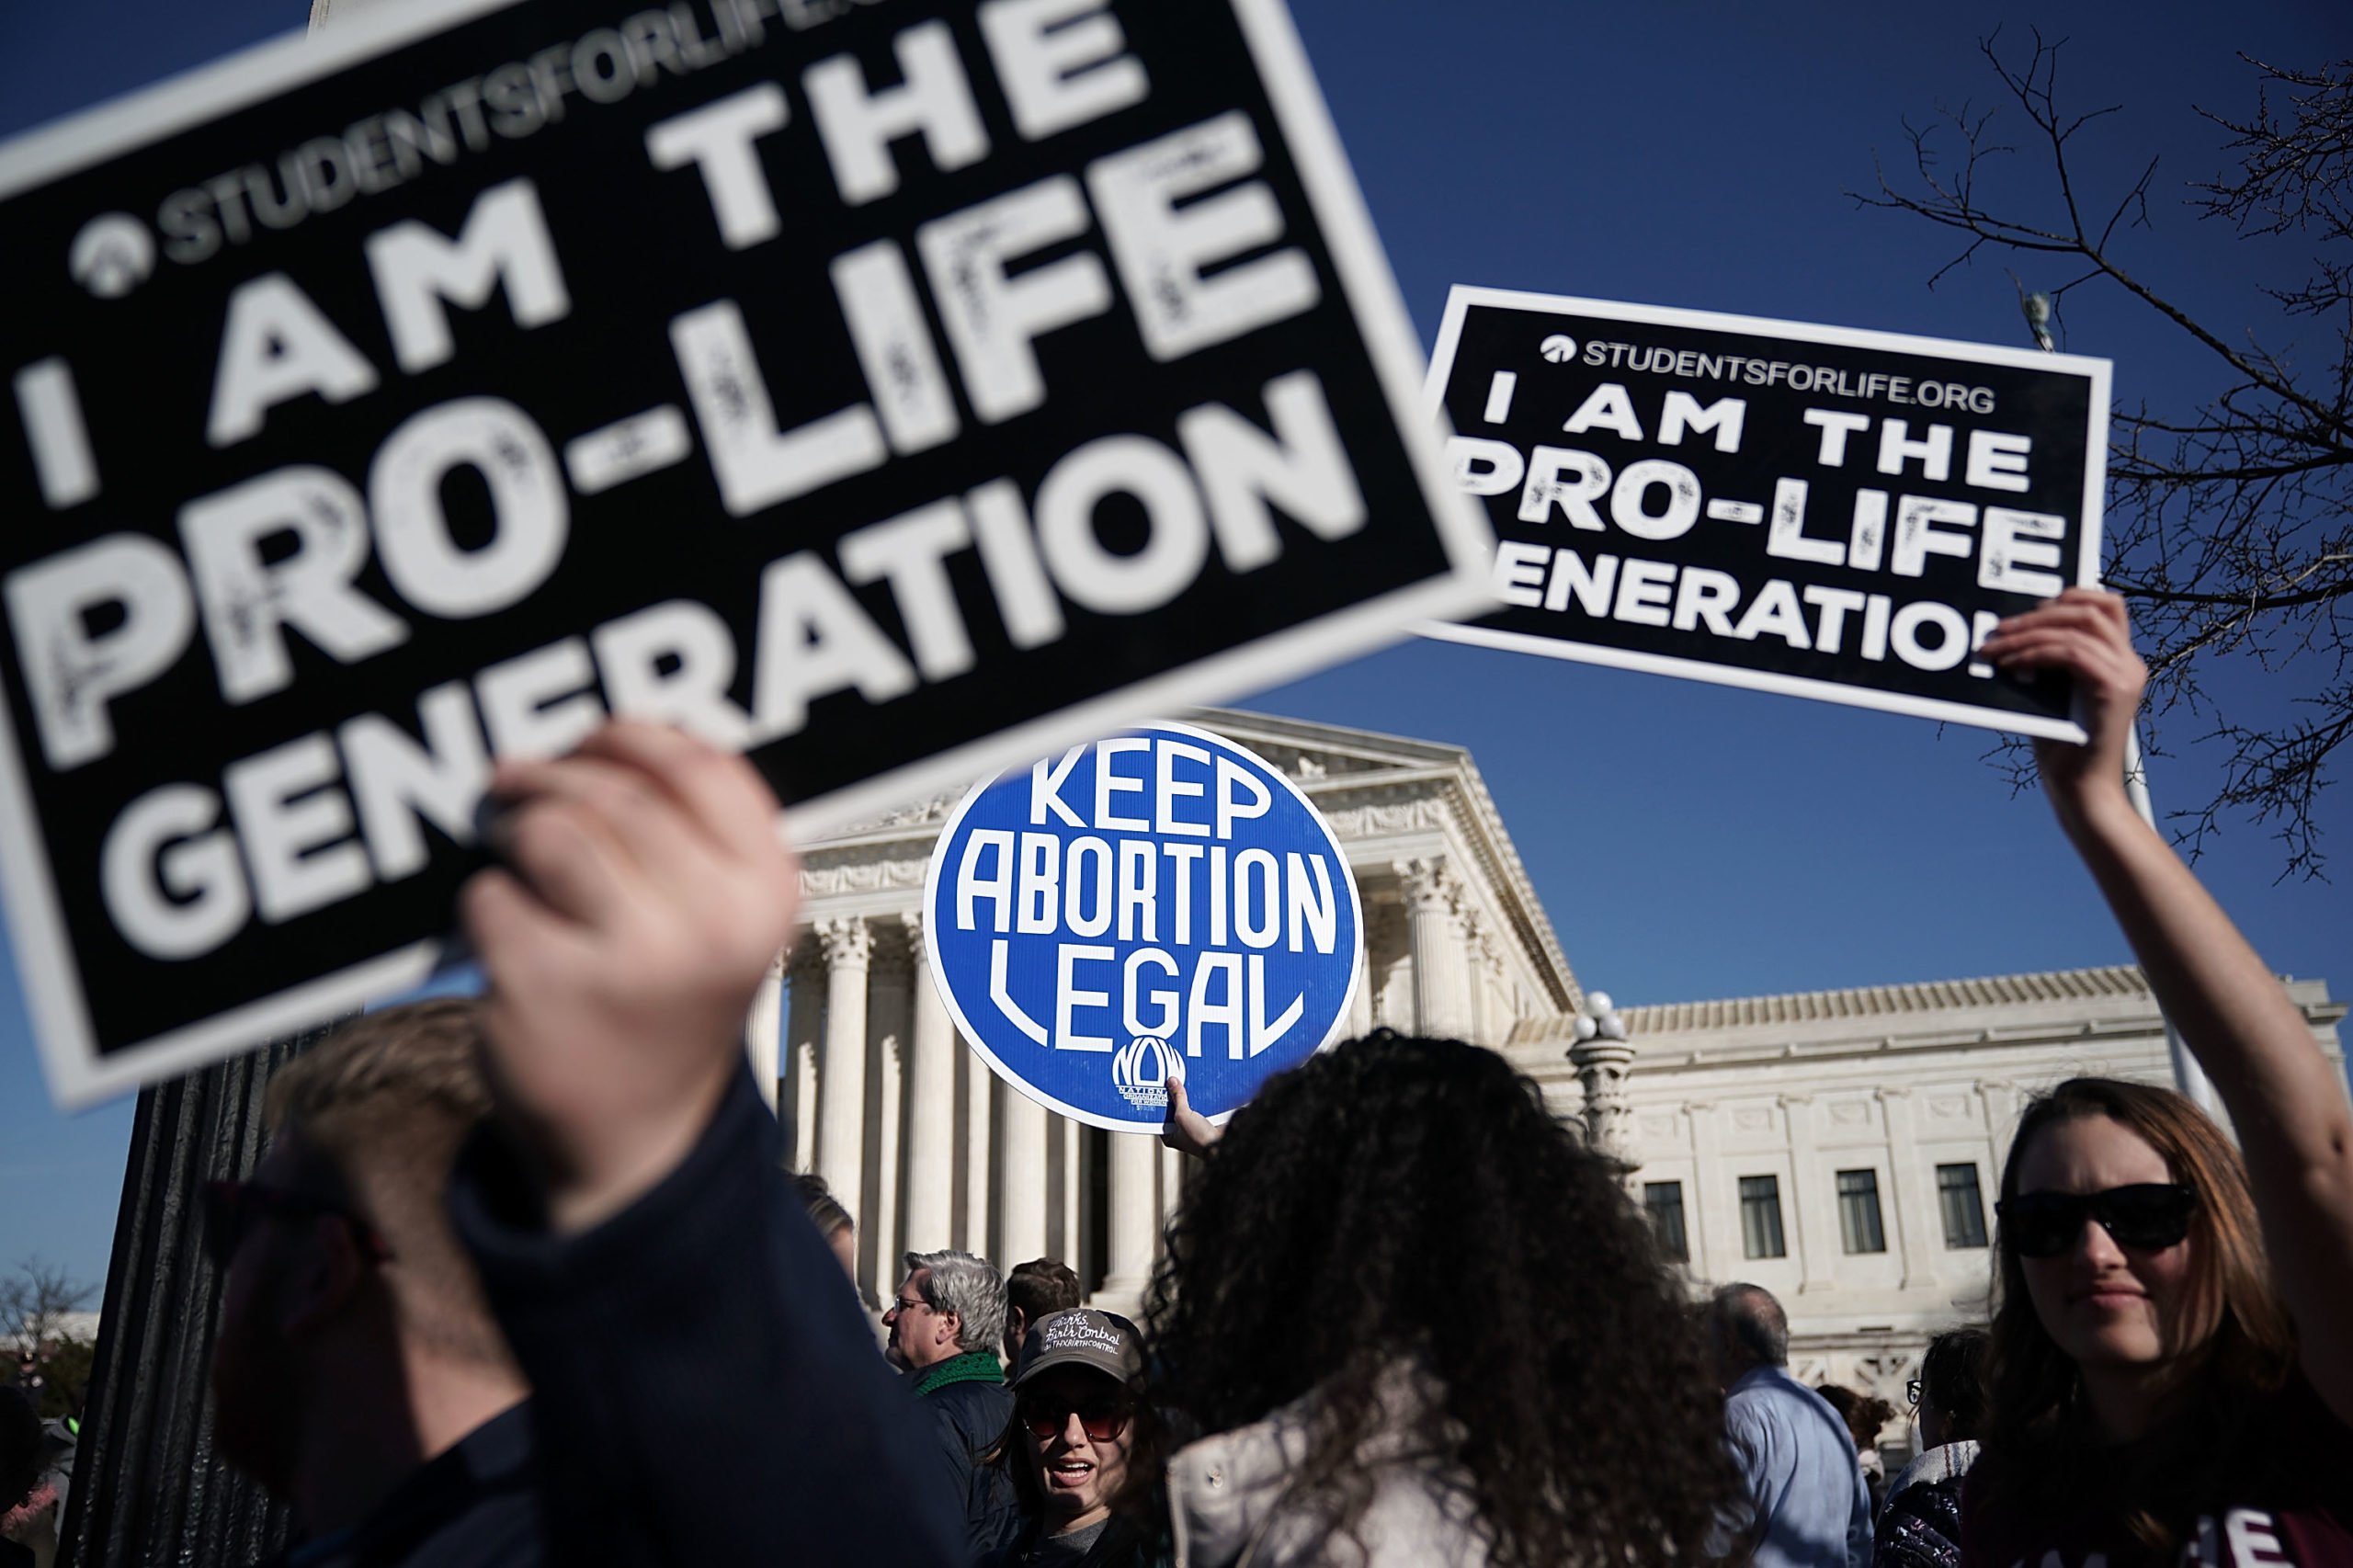 WASHINGTON, DC - JANUARY 19: Pro-life activists try to block the sign of a pro-choice activist during the 2018 March for Life January 19, 2018 in Washington, DC. Activists gathered in the nation's capital for the annual event to protest the anniversary of the Supreme Court Roe v. Wade ruling that legalized abortion in 1973. (Photo by Alex Wong/Getty Images)